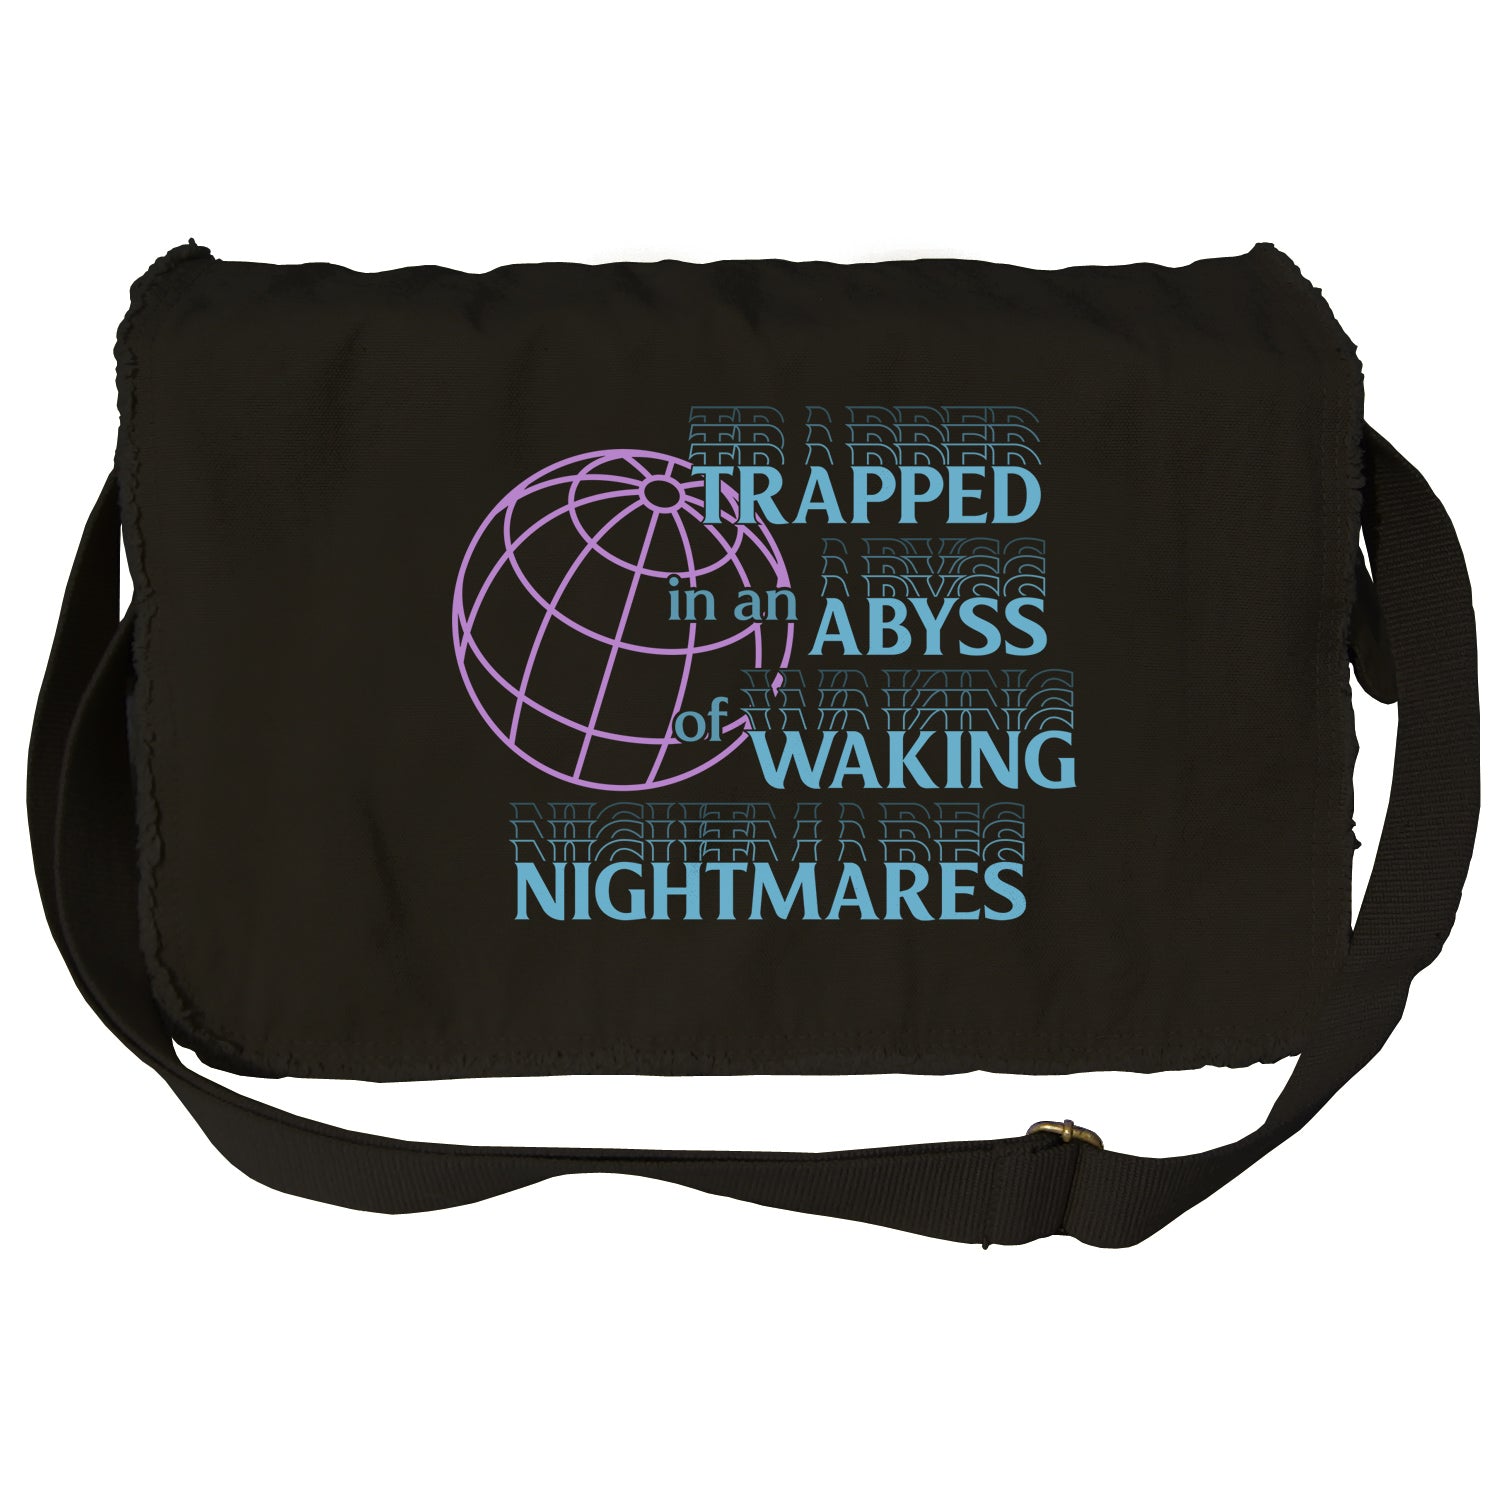 Trapped in an Abyss of Waking Nightmares Messenger Bag